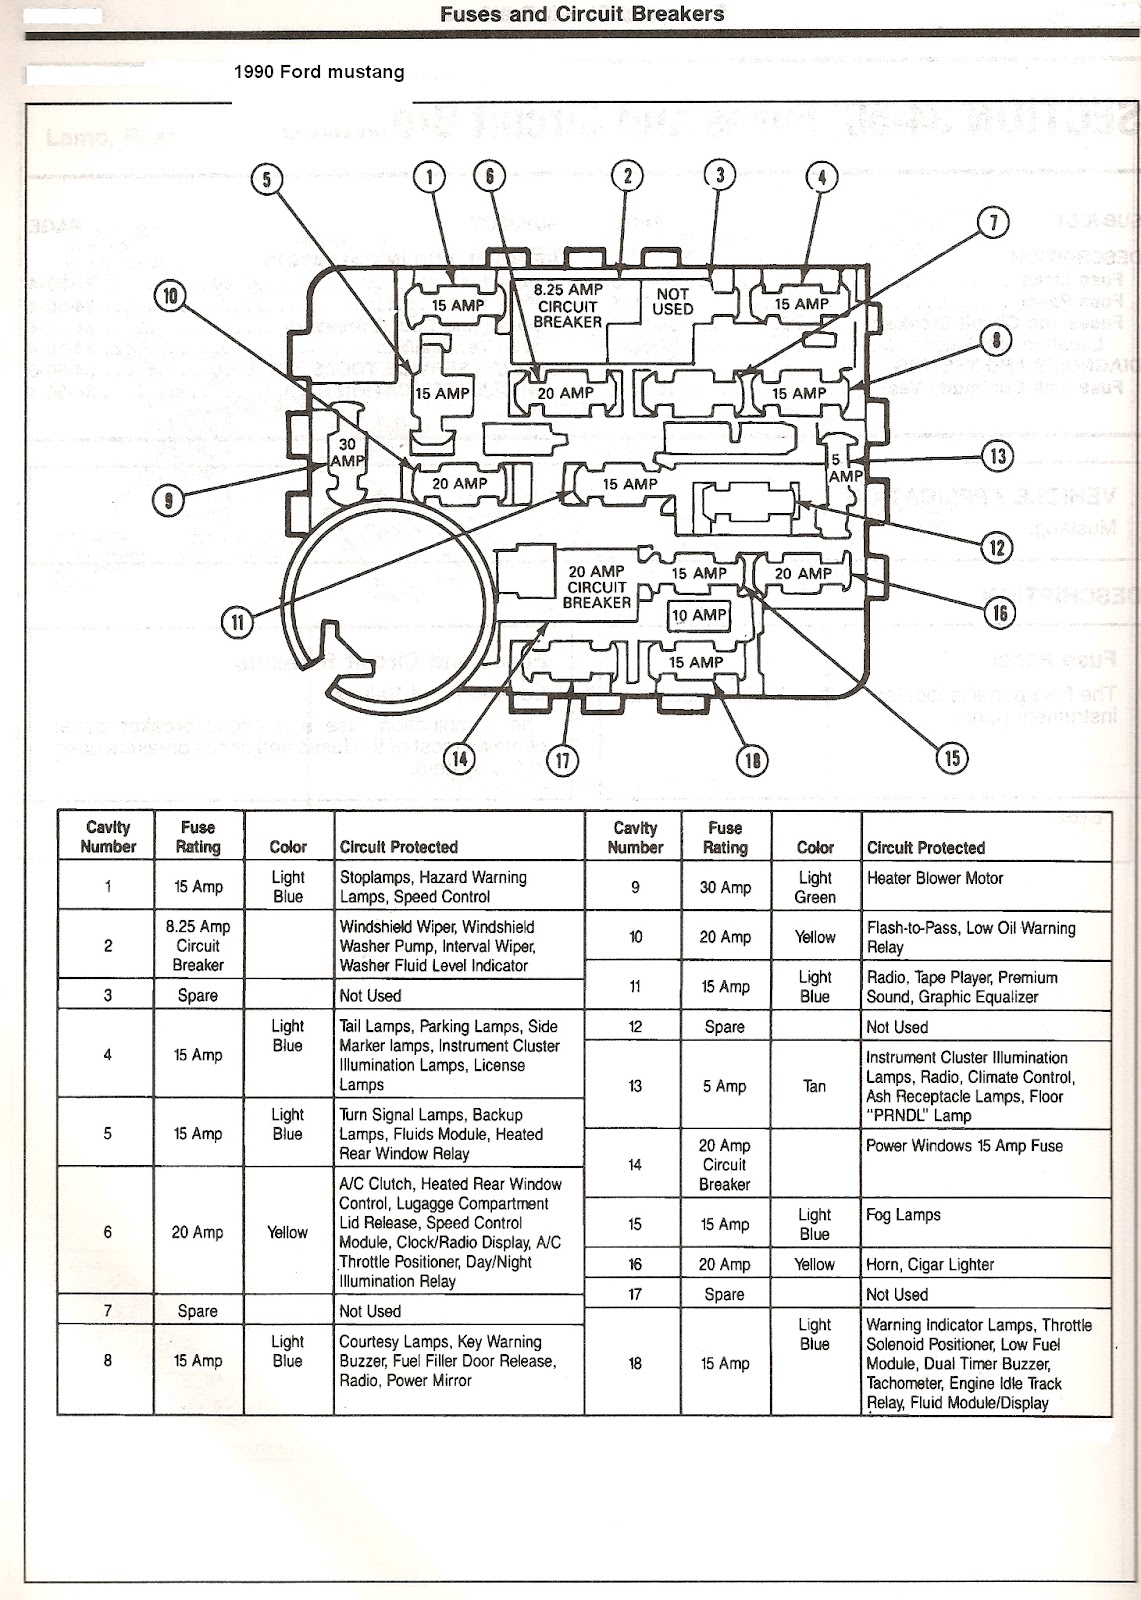 1988 F150 Fuse Box Diagram Another Blog About Wiring Diagram